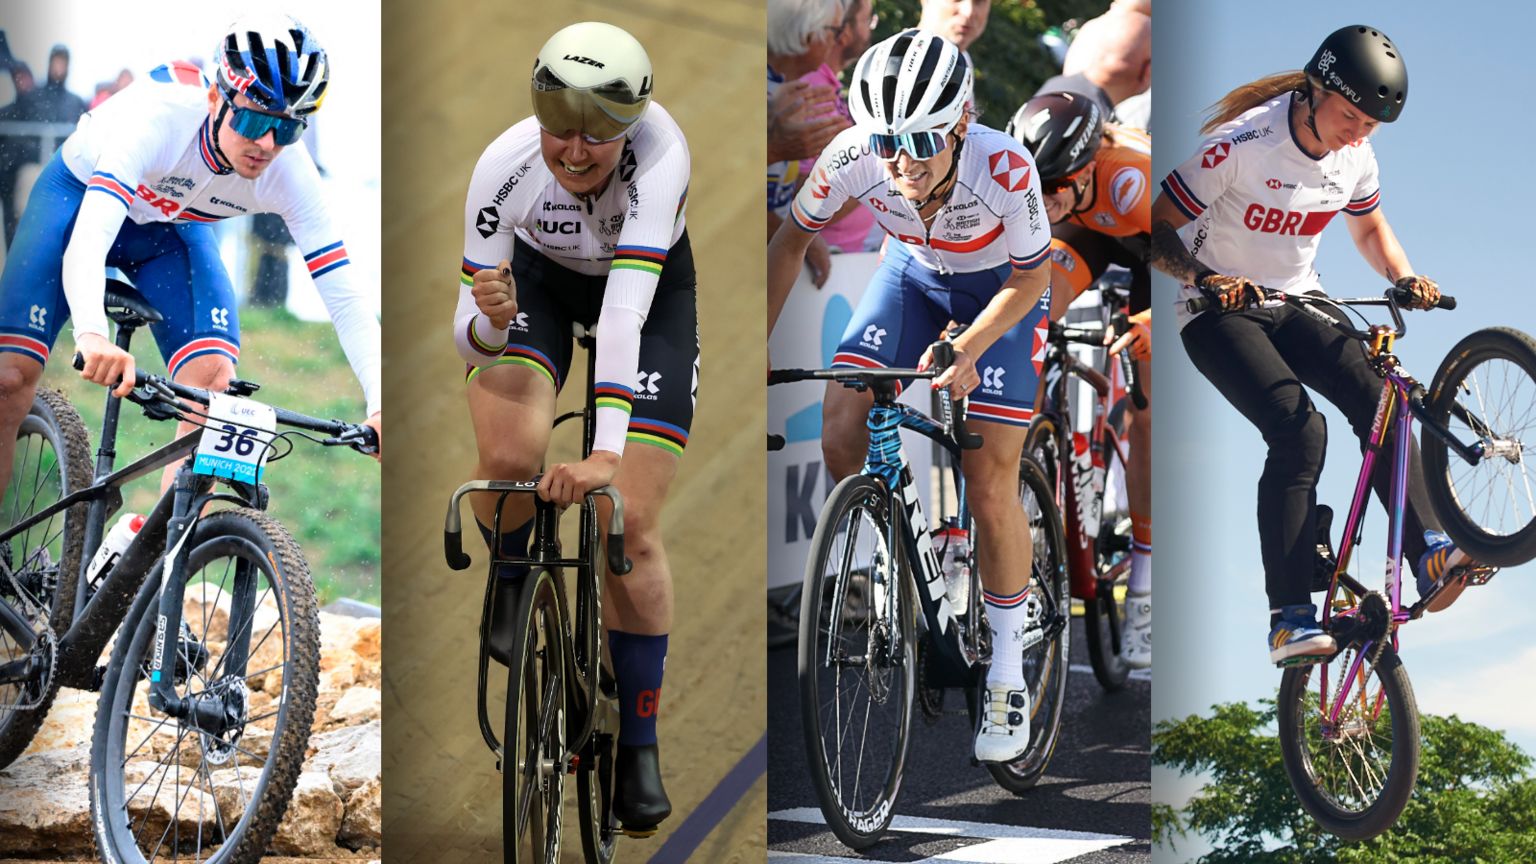 Tom Pidcock, Katie Archibald, Lizzie Deignan and Charlotte Worthington are all in Great Britain's team